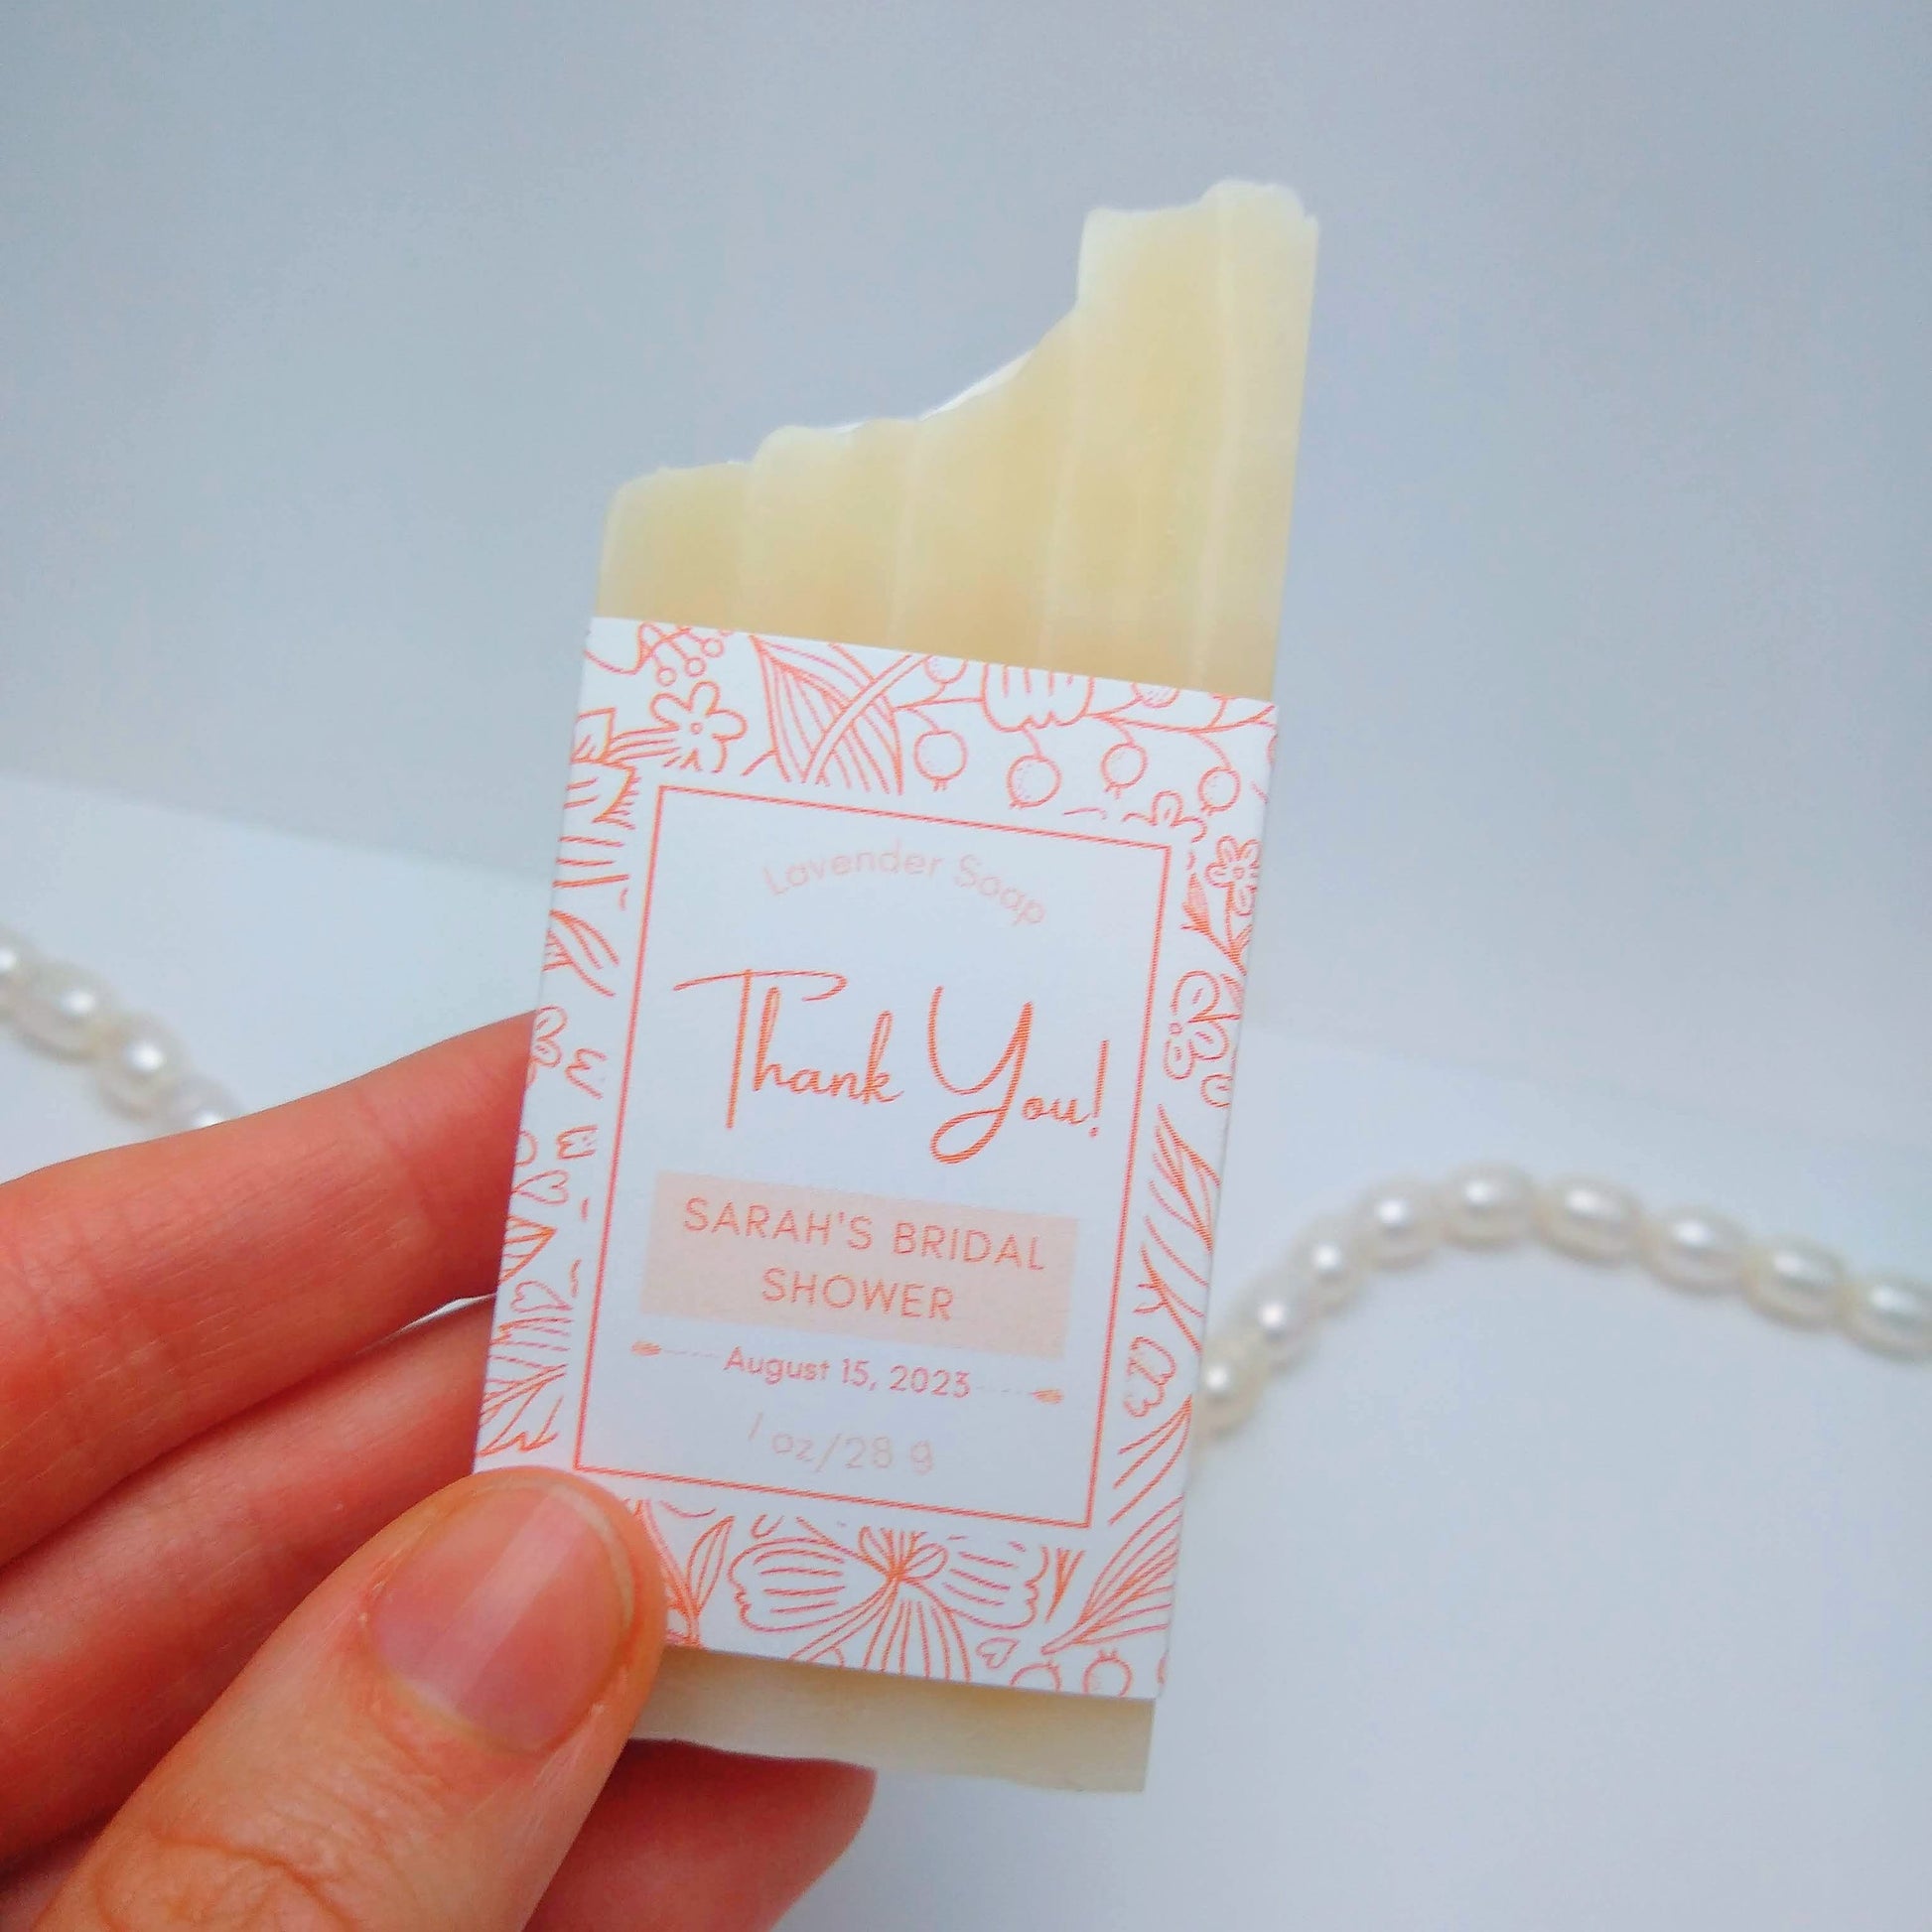 A mini bar of cream-colored soap held in a hand with a light orange label printed with Thank You! Sarah's Bridal Shower, August 15, 2023. They are on a white background with a string of pearls as an accent.